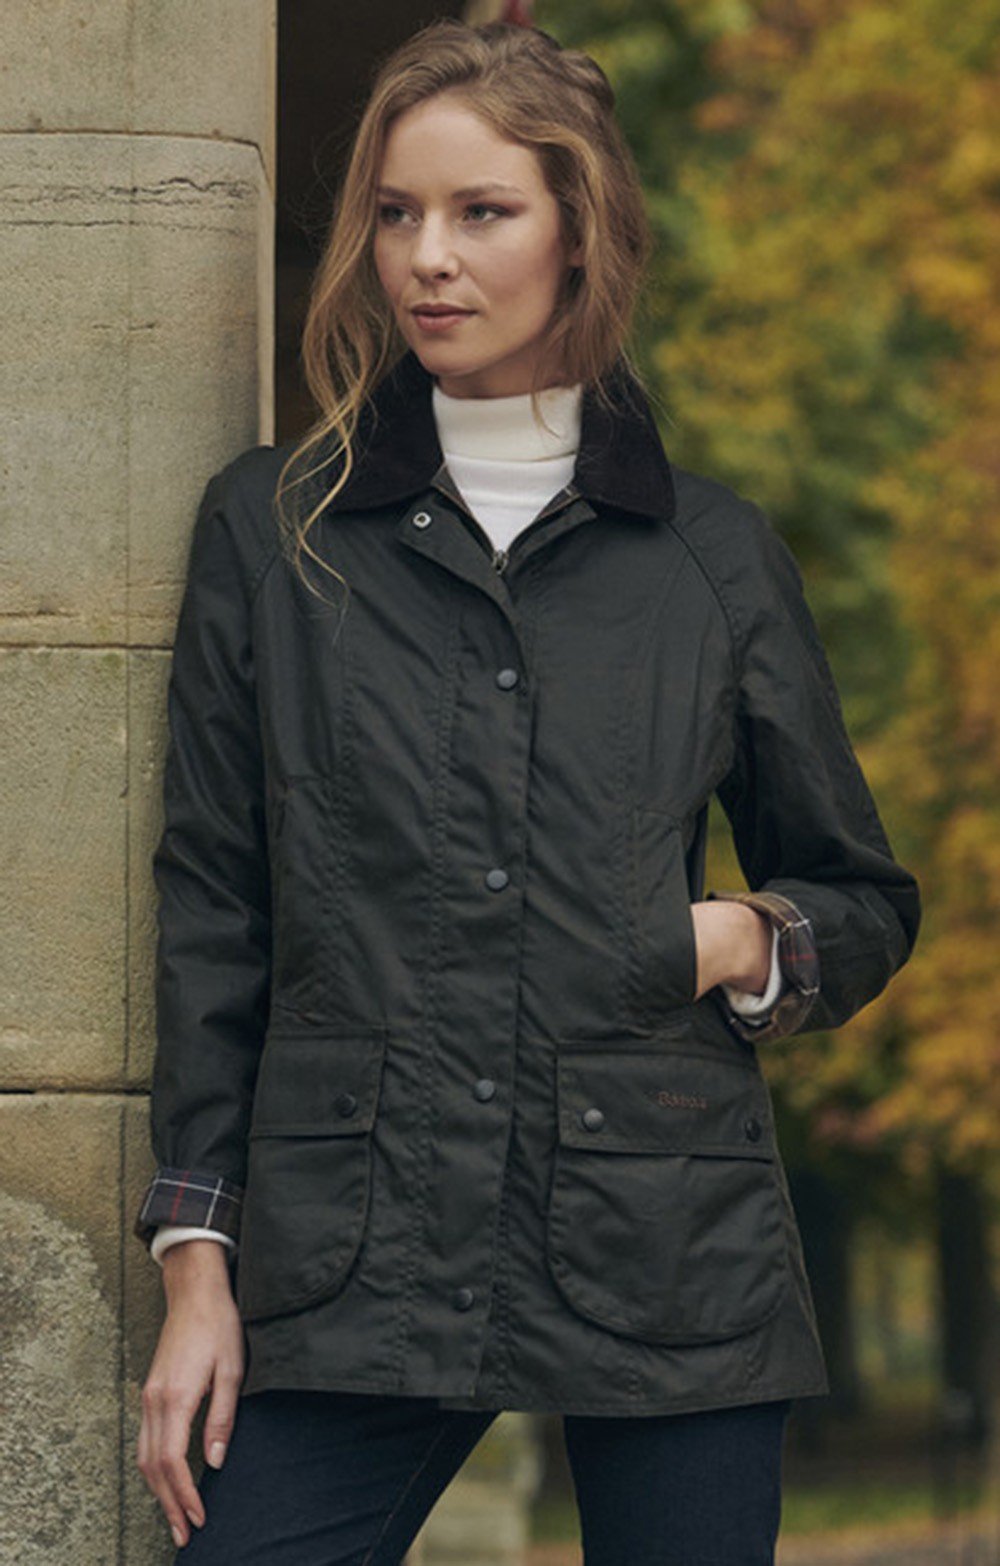 Barbour - The British brand that we all love and that's made to last